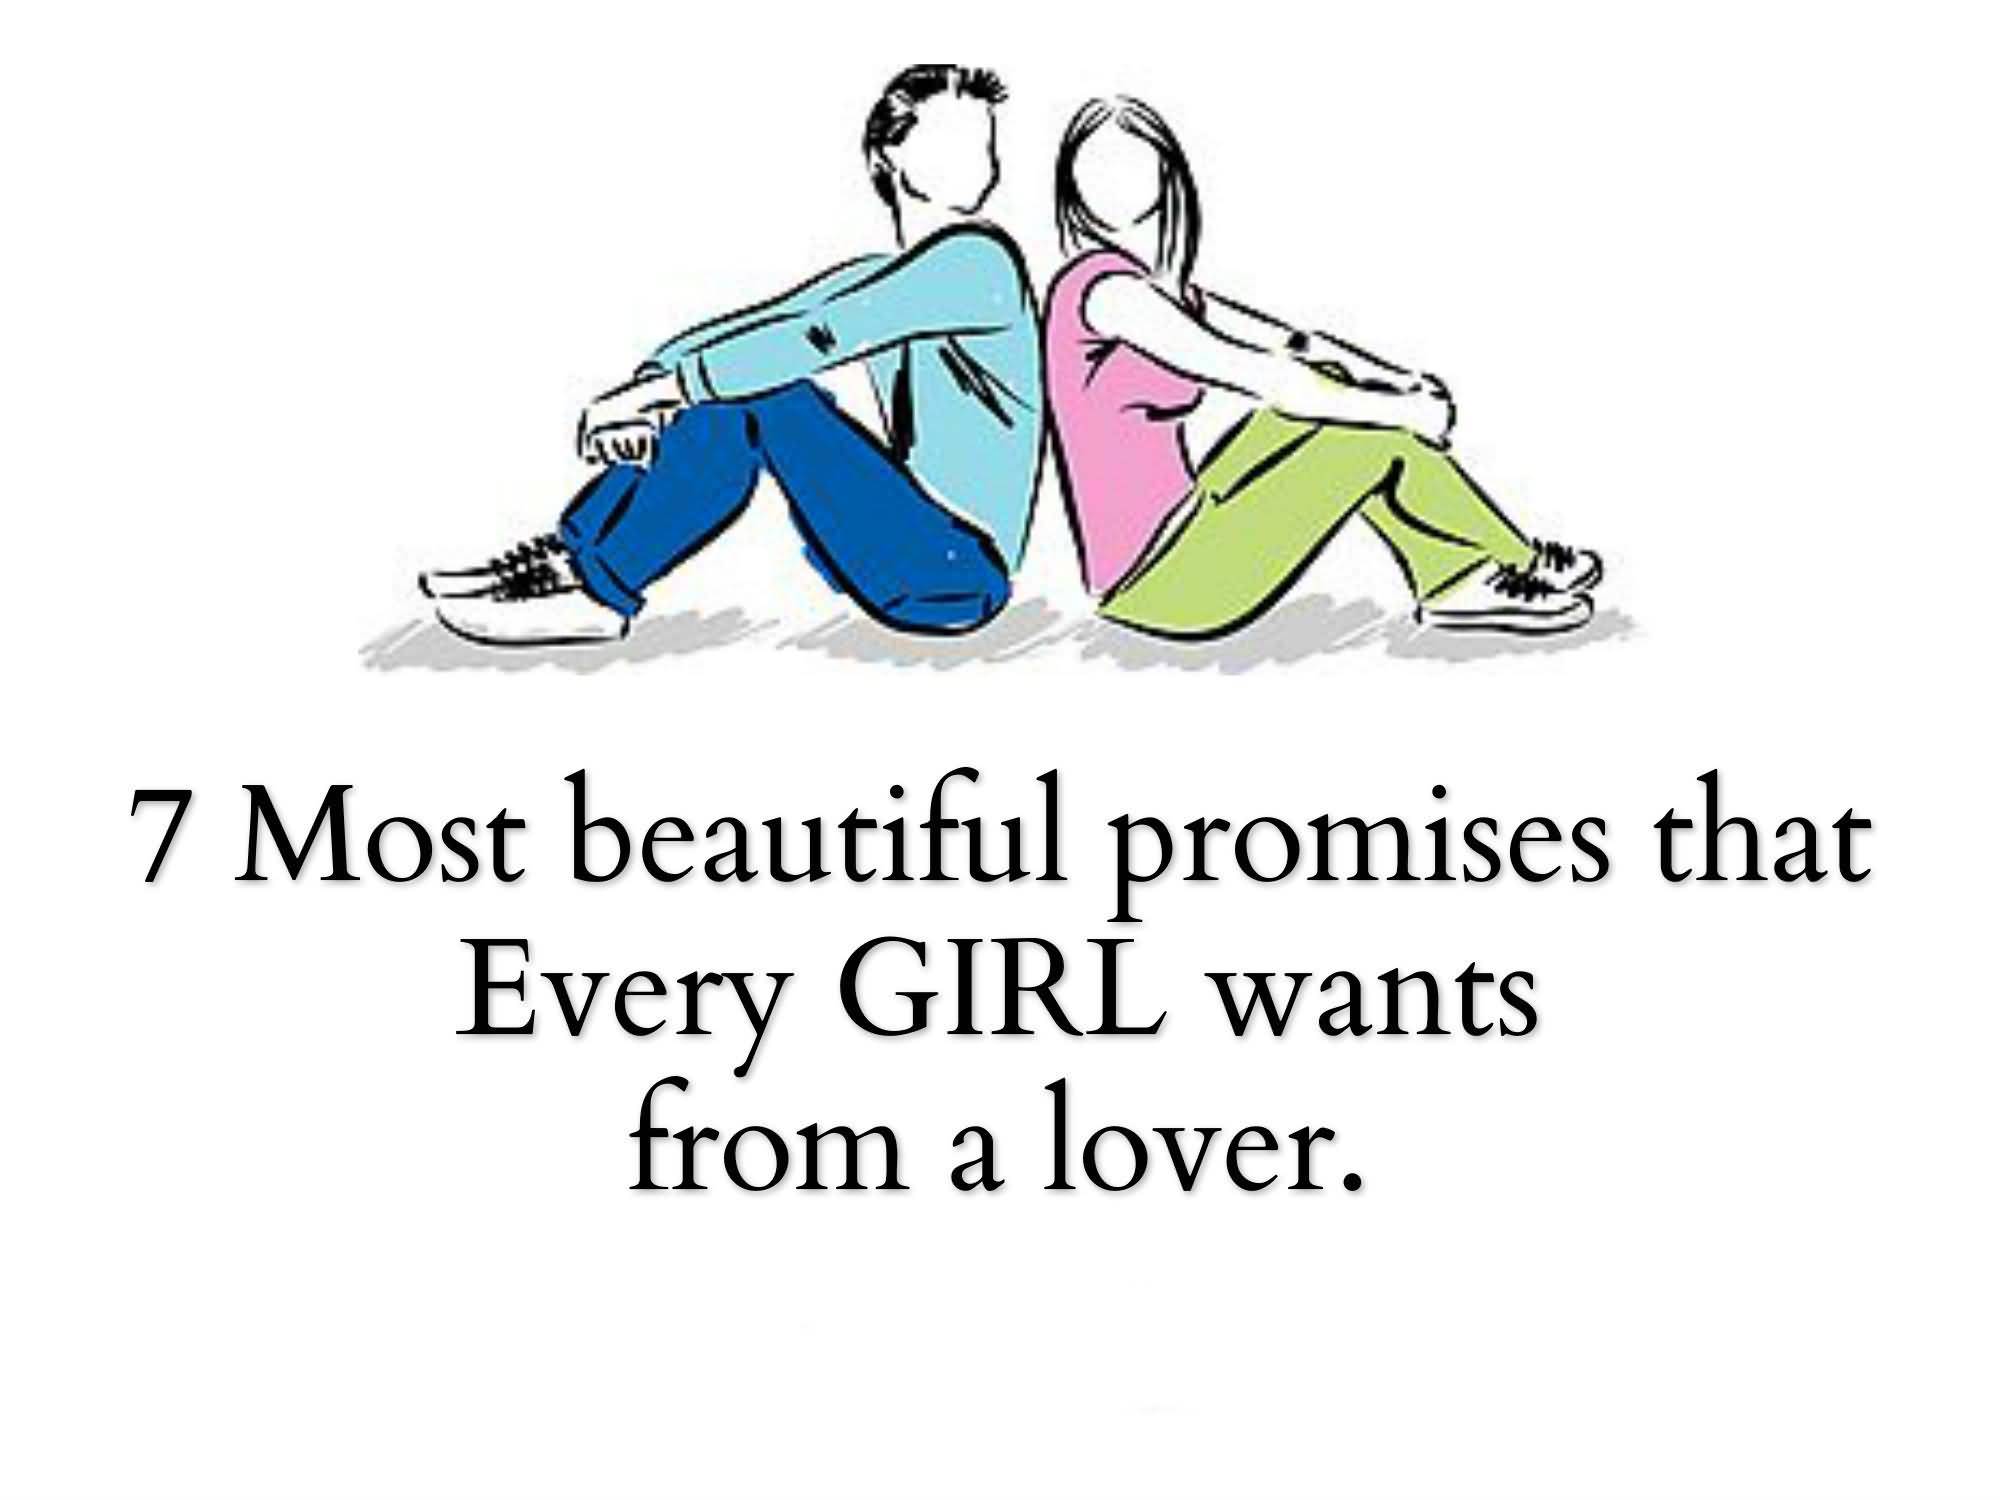 7 MOST BEAUTIFUL PROMISES THAT EVERY GIRL WANTS FROM A LOVER